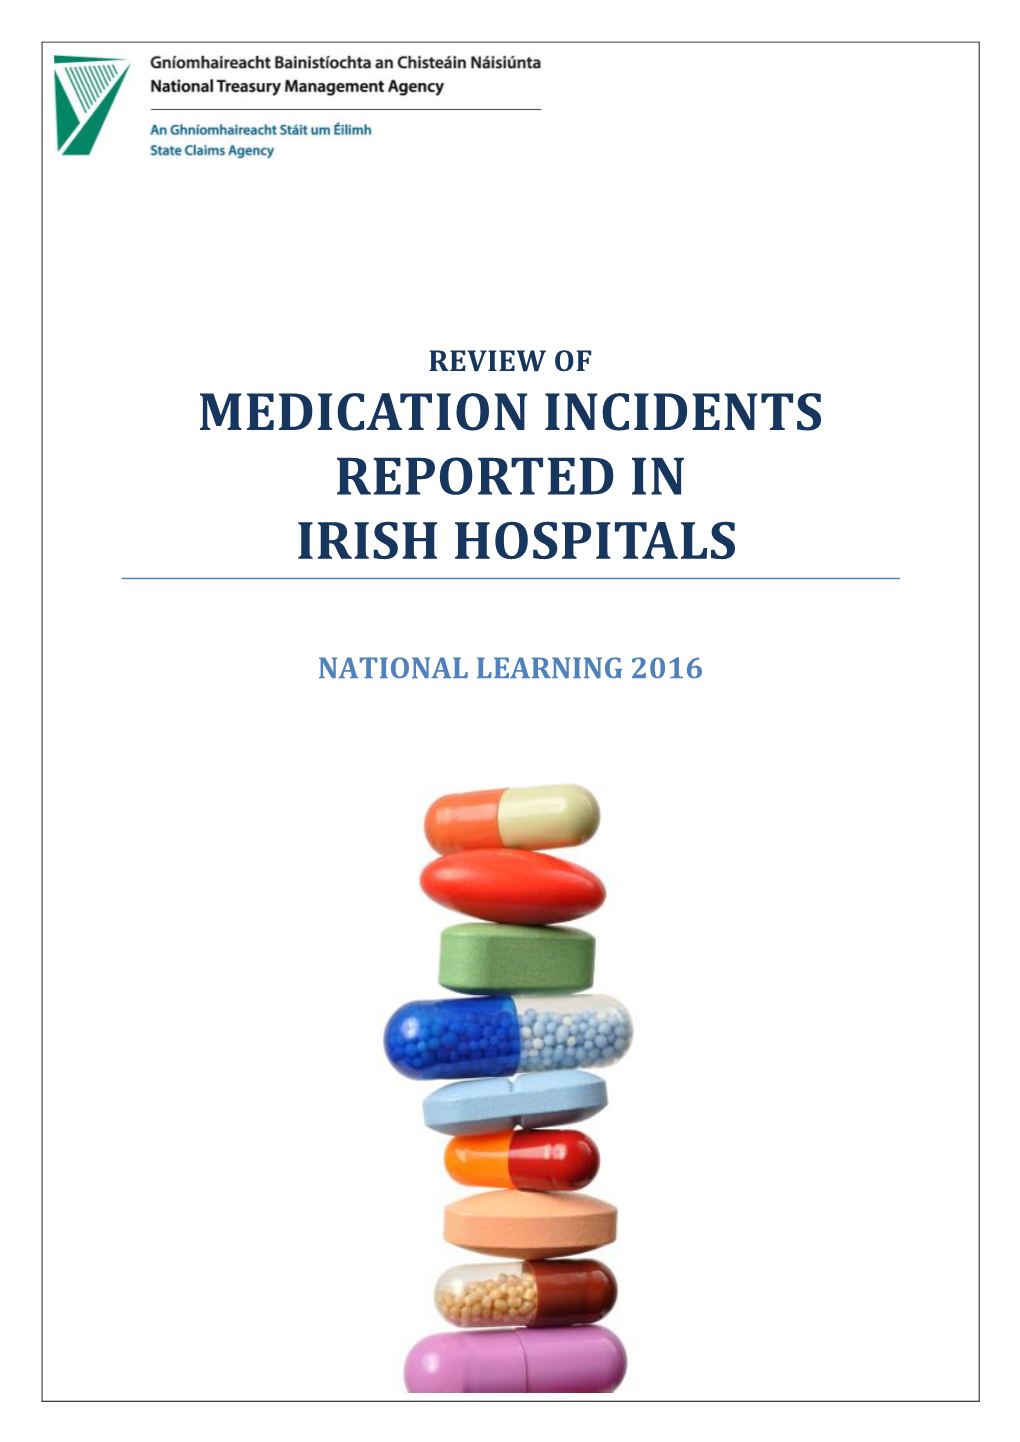 Medication Incidents Reported in Irish Hospitals